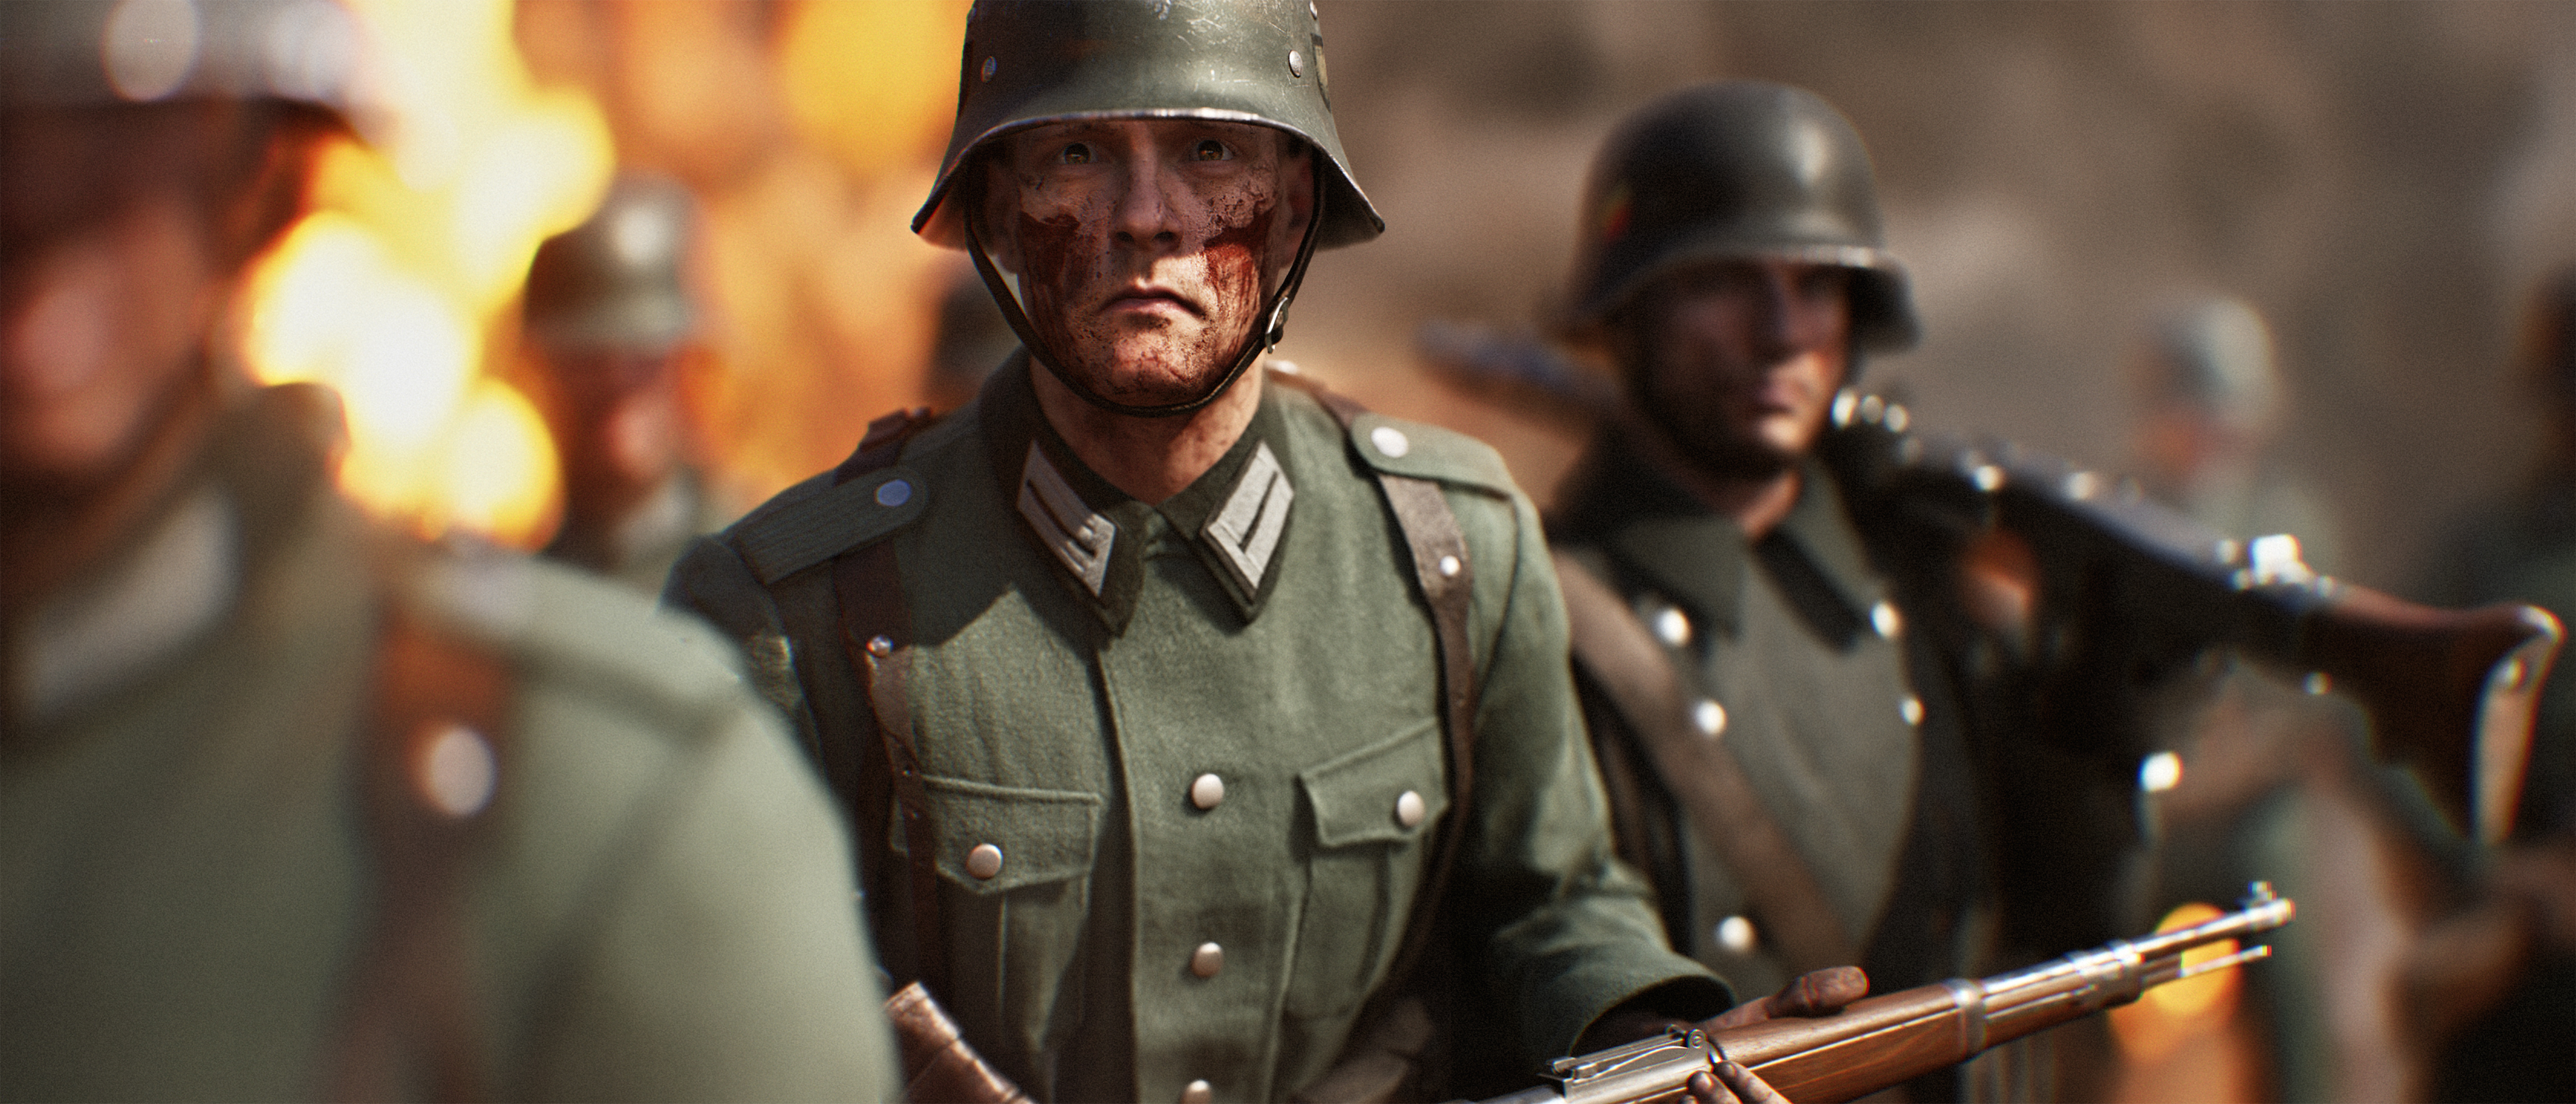 German Soldiers Battlefield 5 Wallpaper Hd Games 4k Wallpapers Images Photos And Background Wallpapers Den